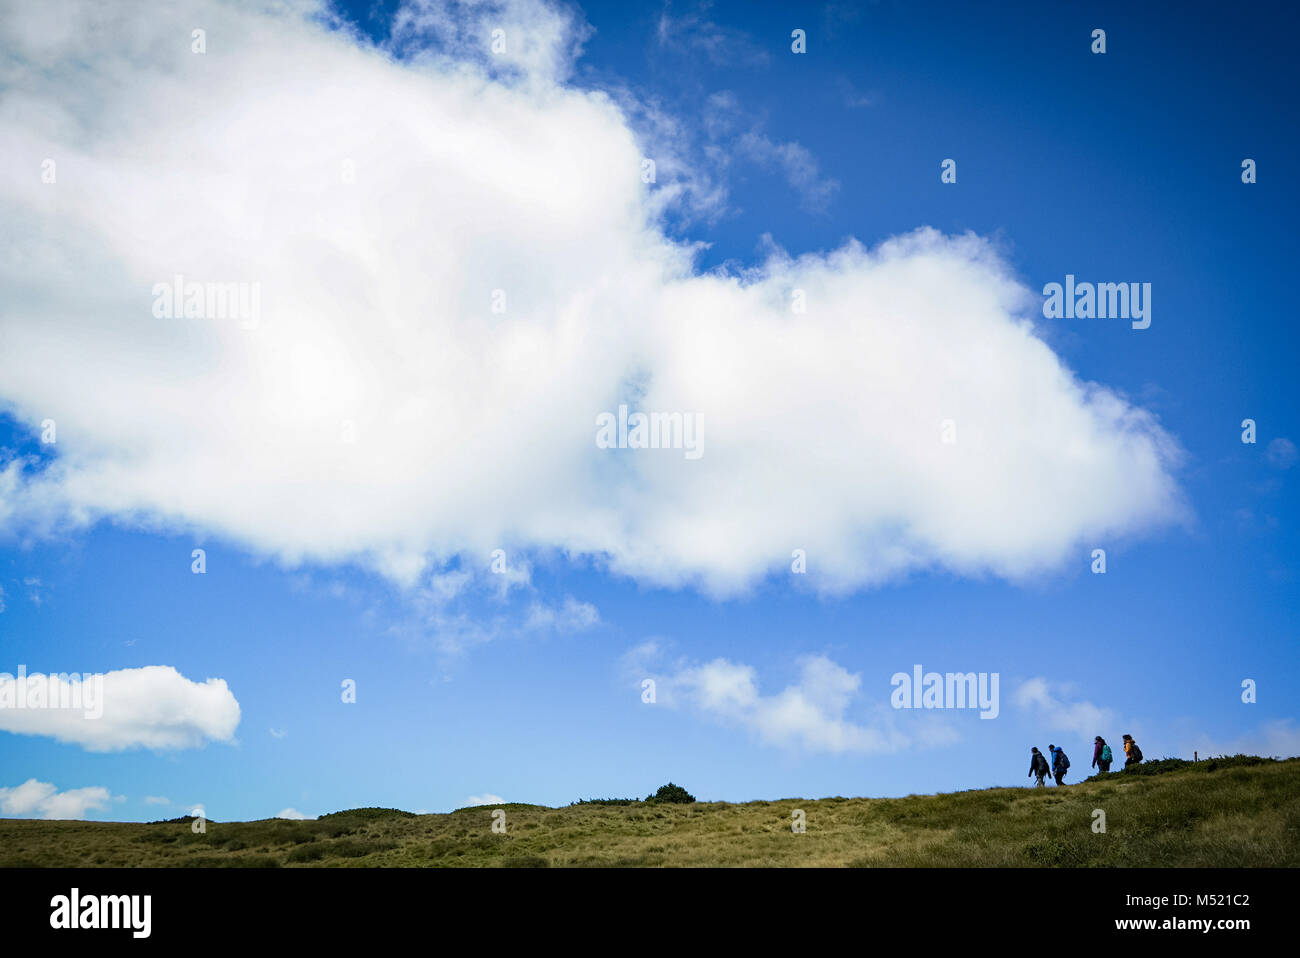 Big cloud in sunny sky over a group of people hiking in french alps Stock Photo